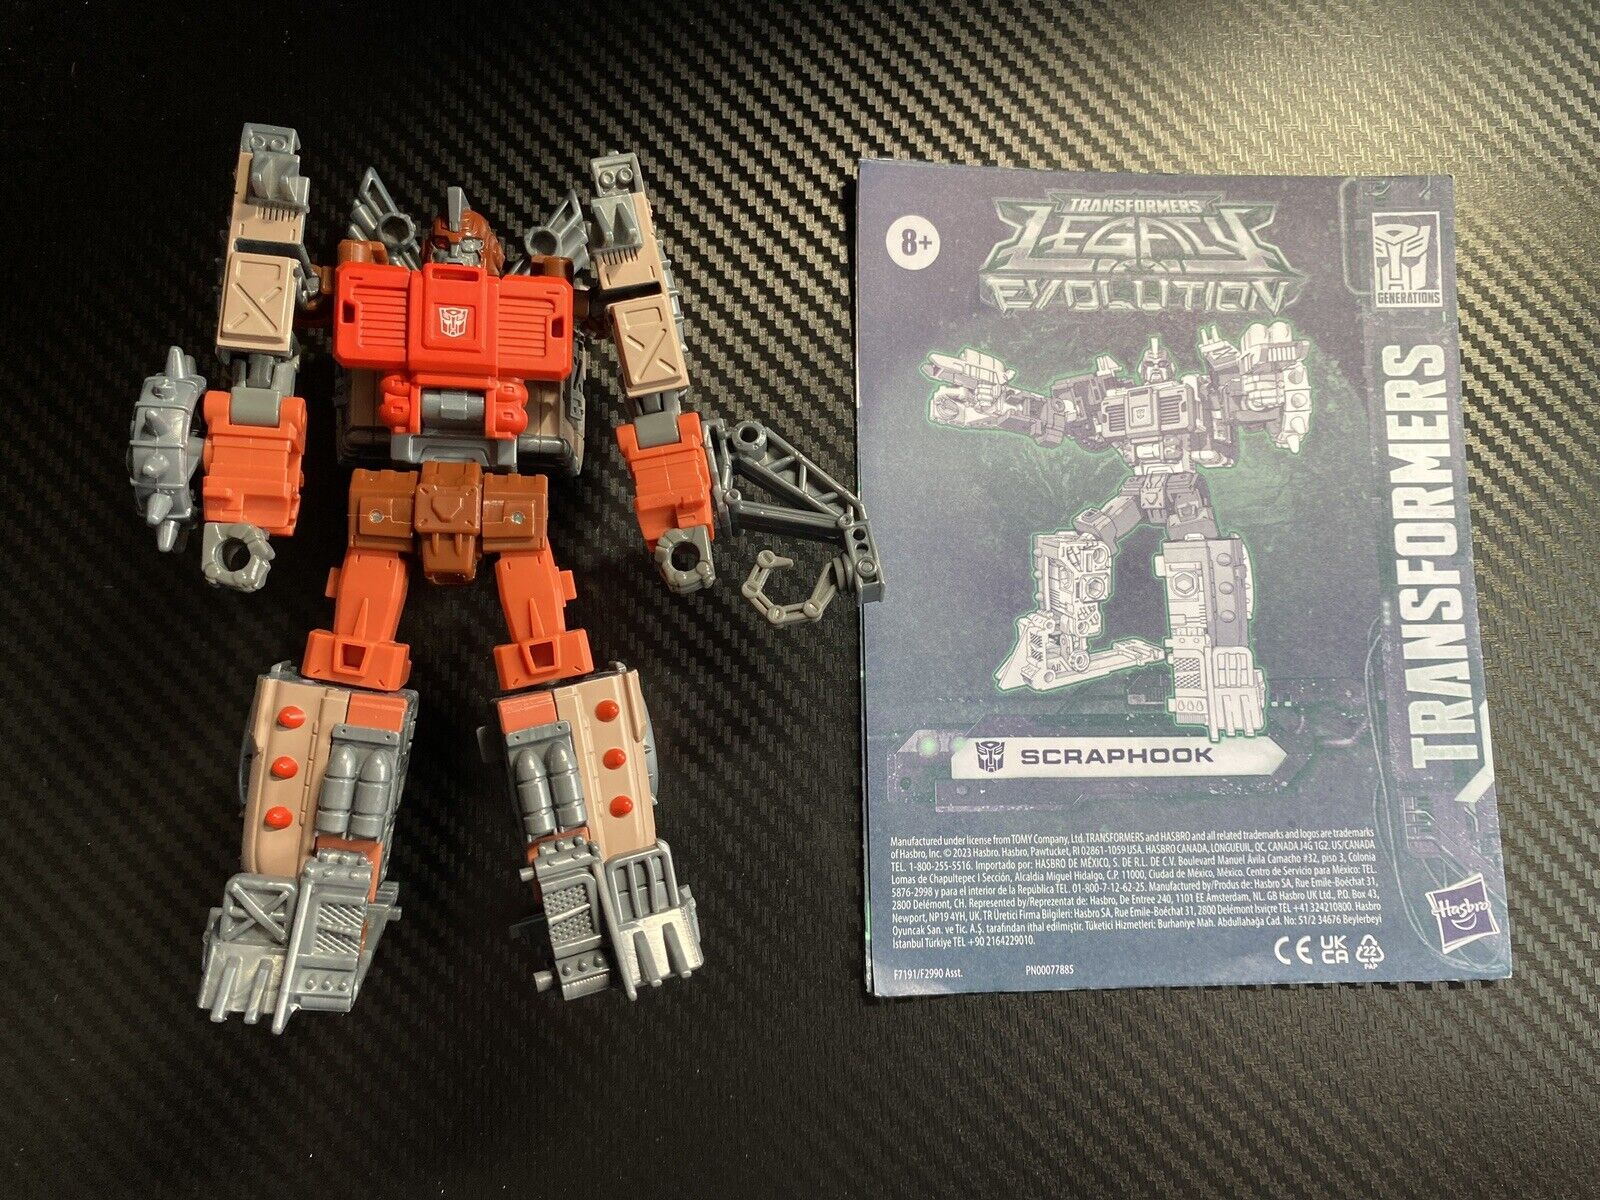 Transformers Legacy Evolution Scraphook Loose Complete With Instructions